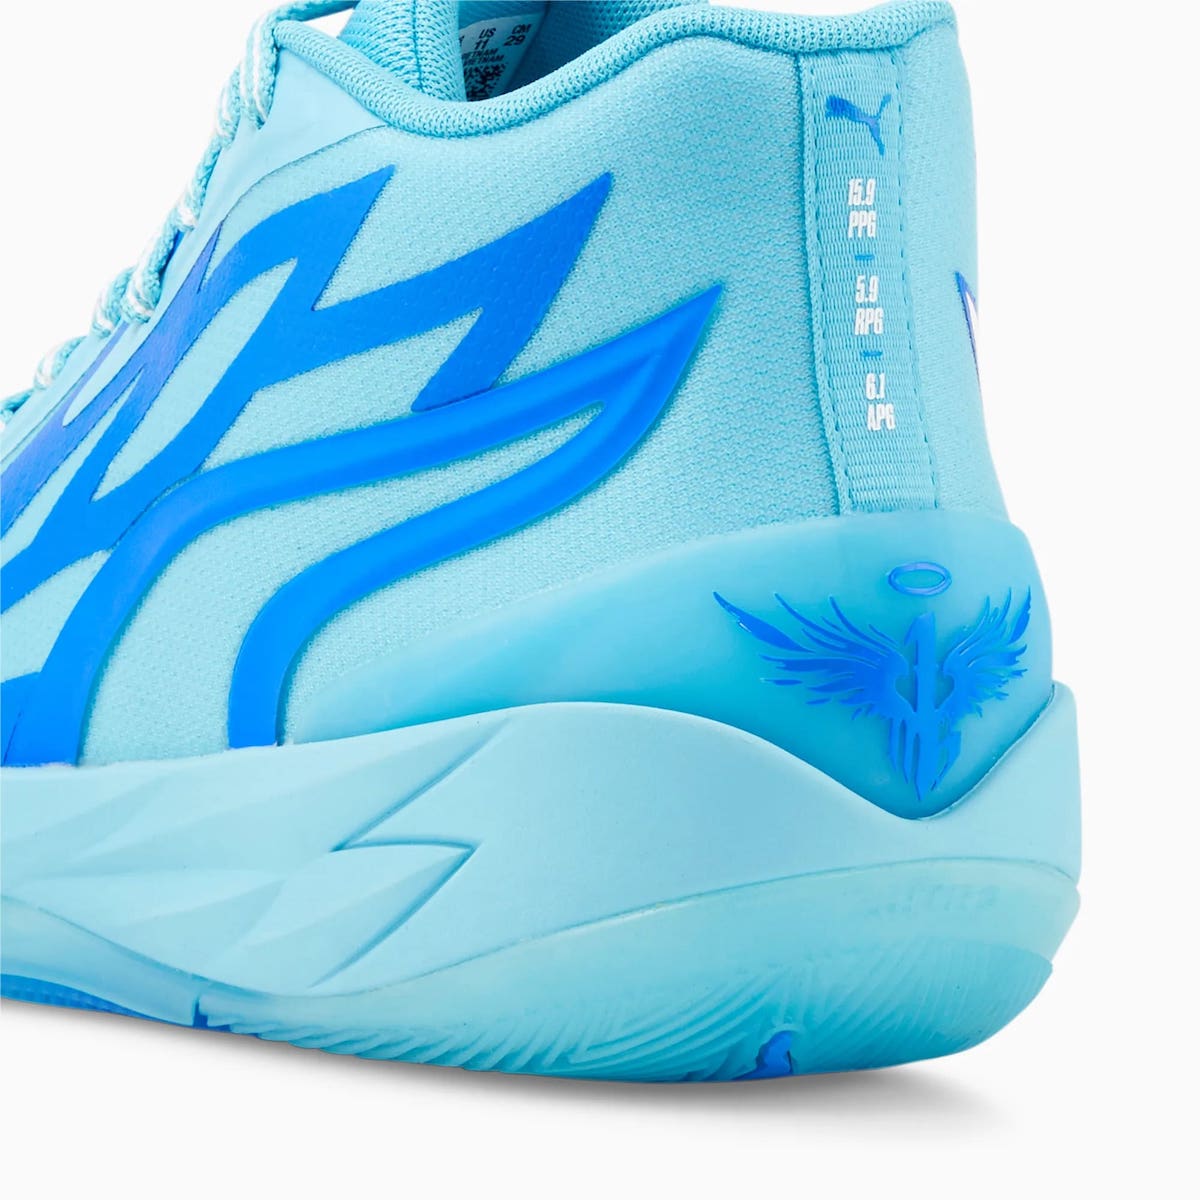 Puma MB.02 Rookie of the Year 377586-01 Release Date Info